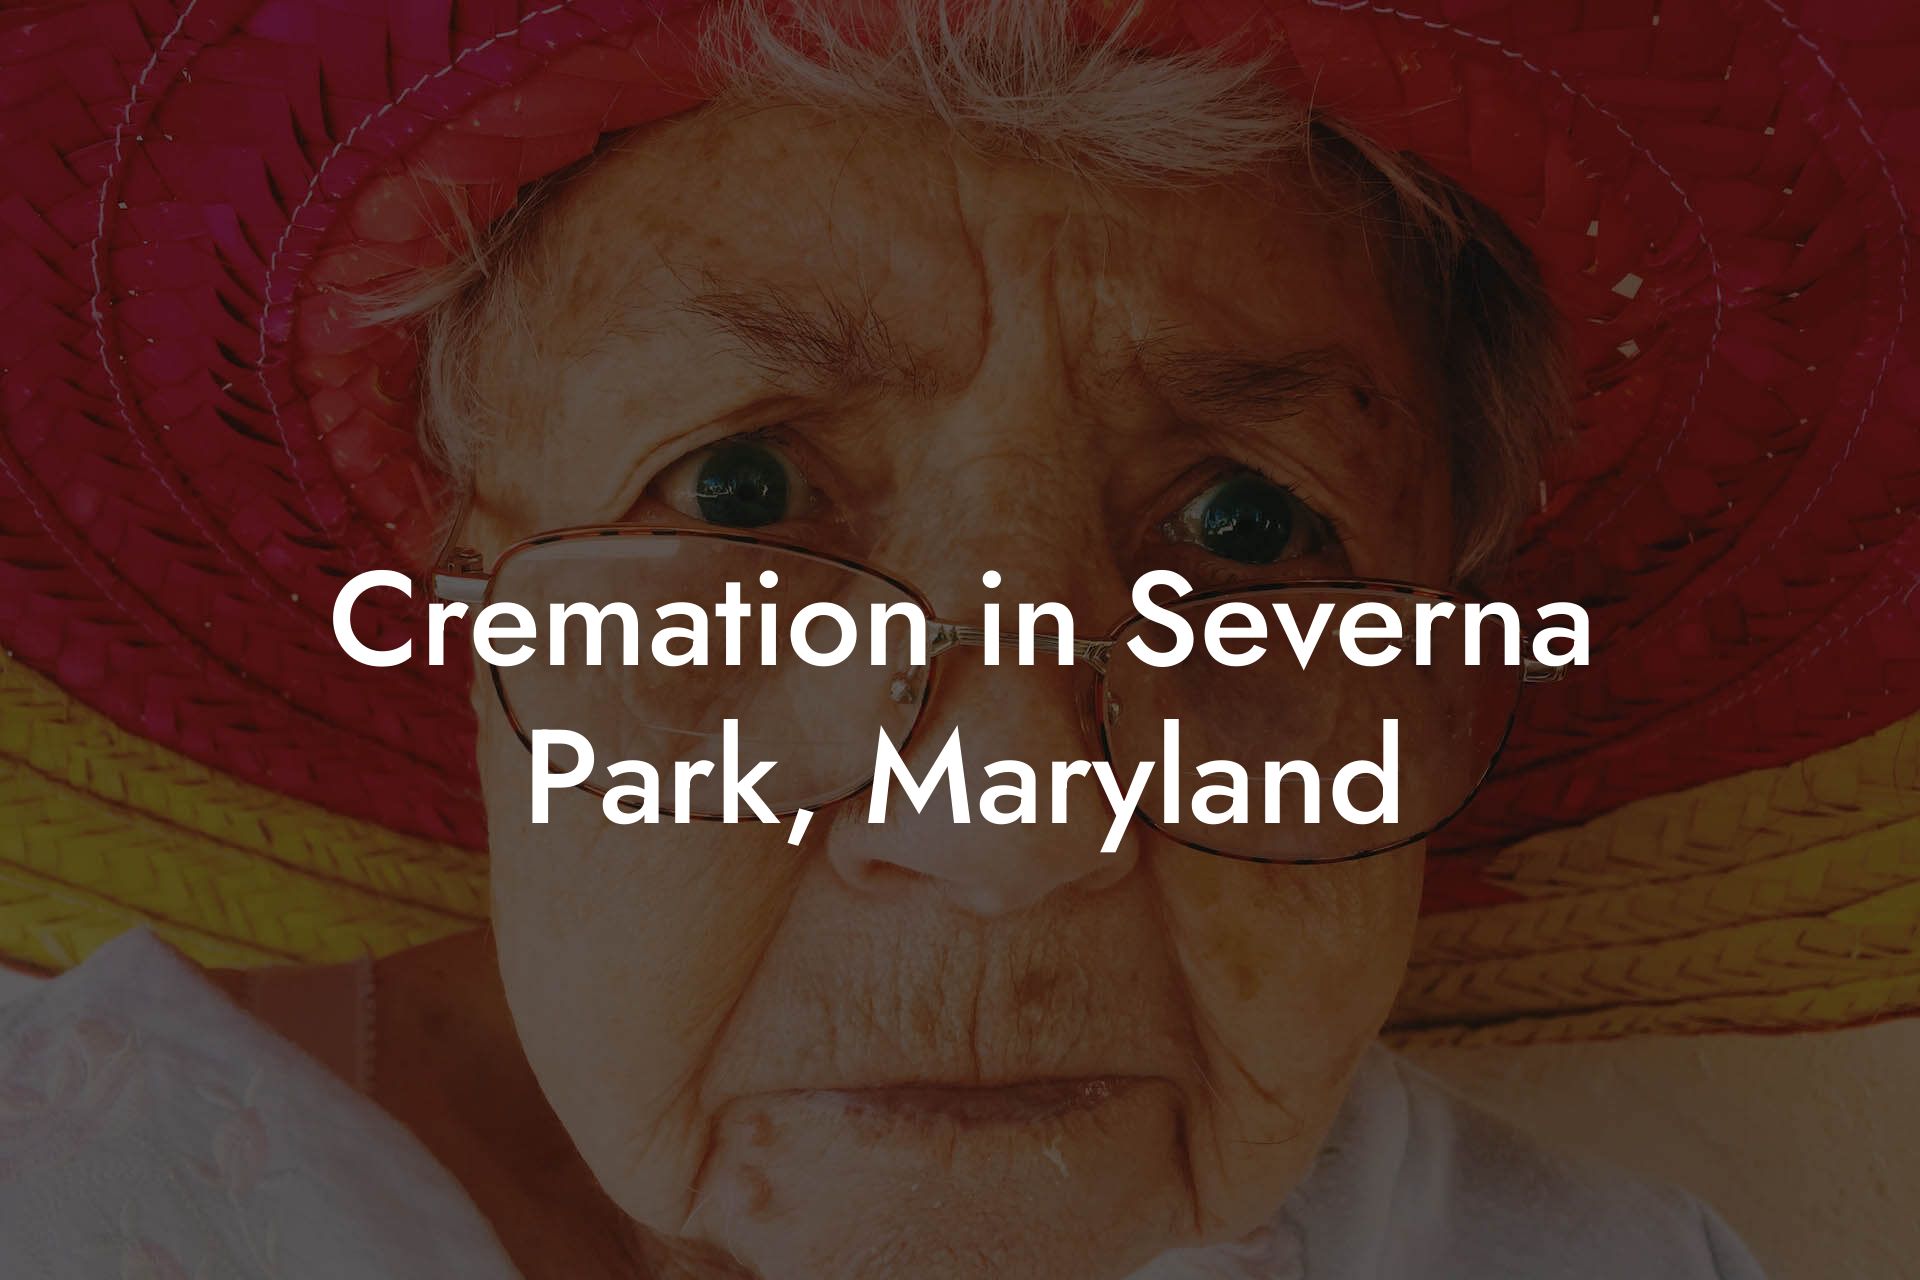 Cremation in Severna Park, Maryland